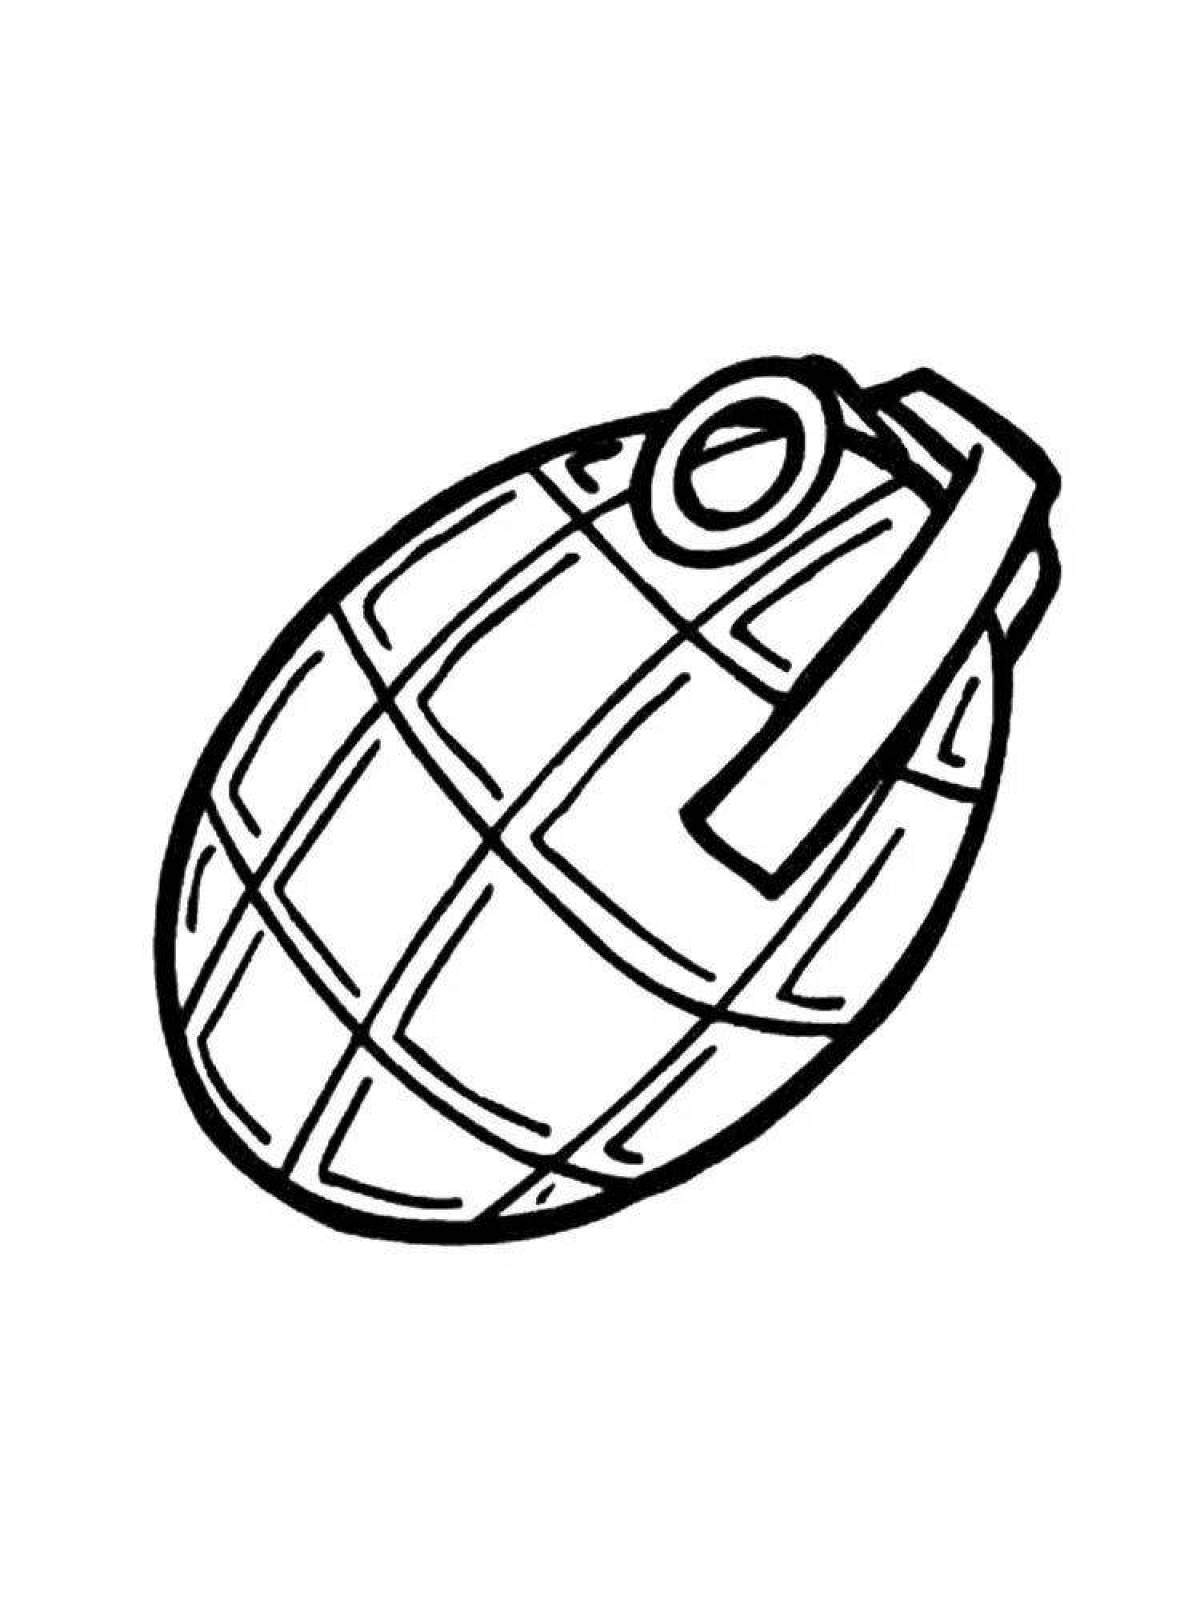 Striking standoff 2 bomb coloring page